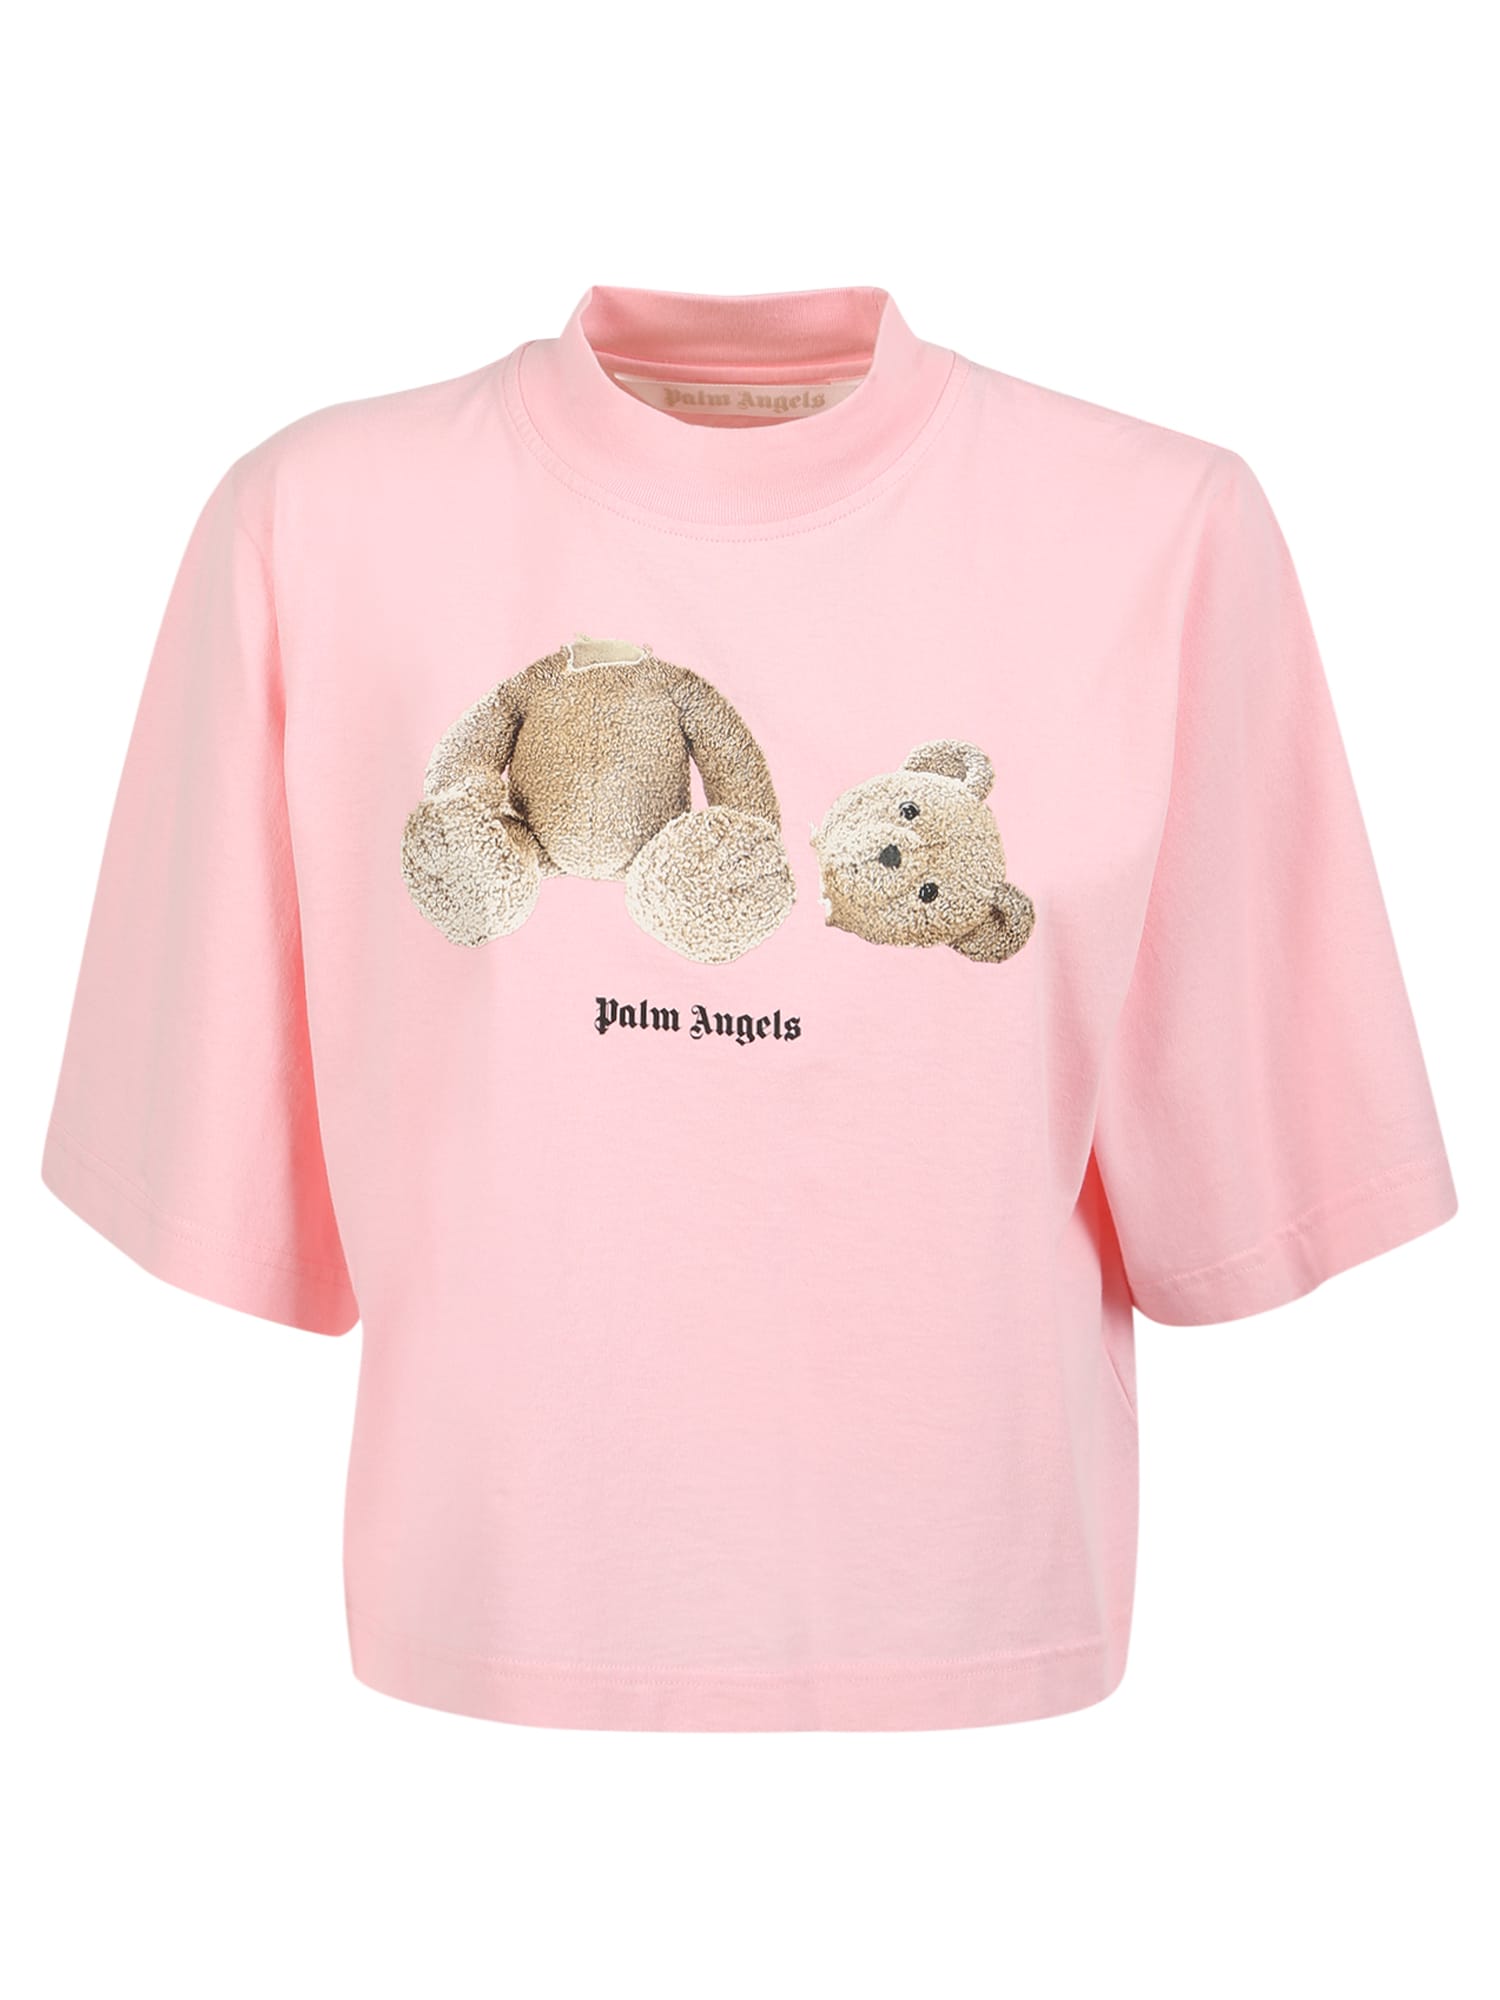 T-shirt With Signature Teddy Motif By Palm Angels Making It Recognisable